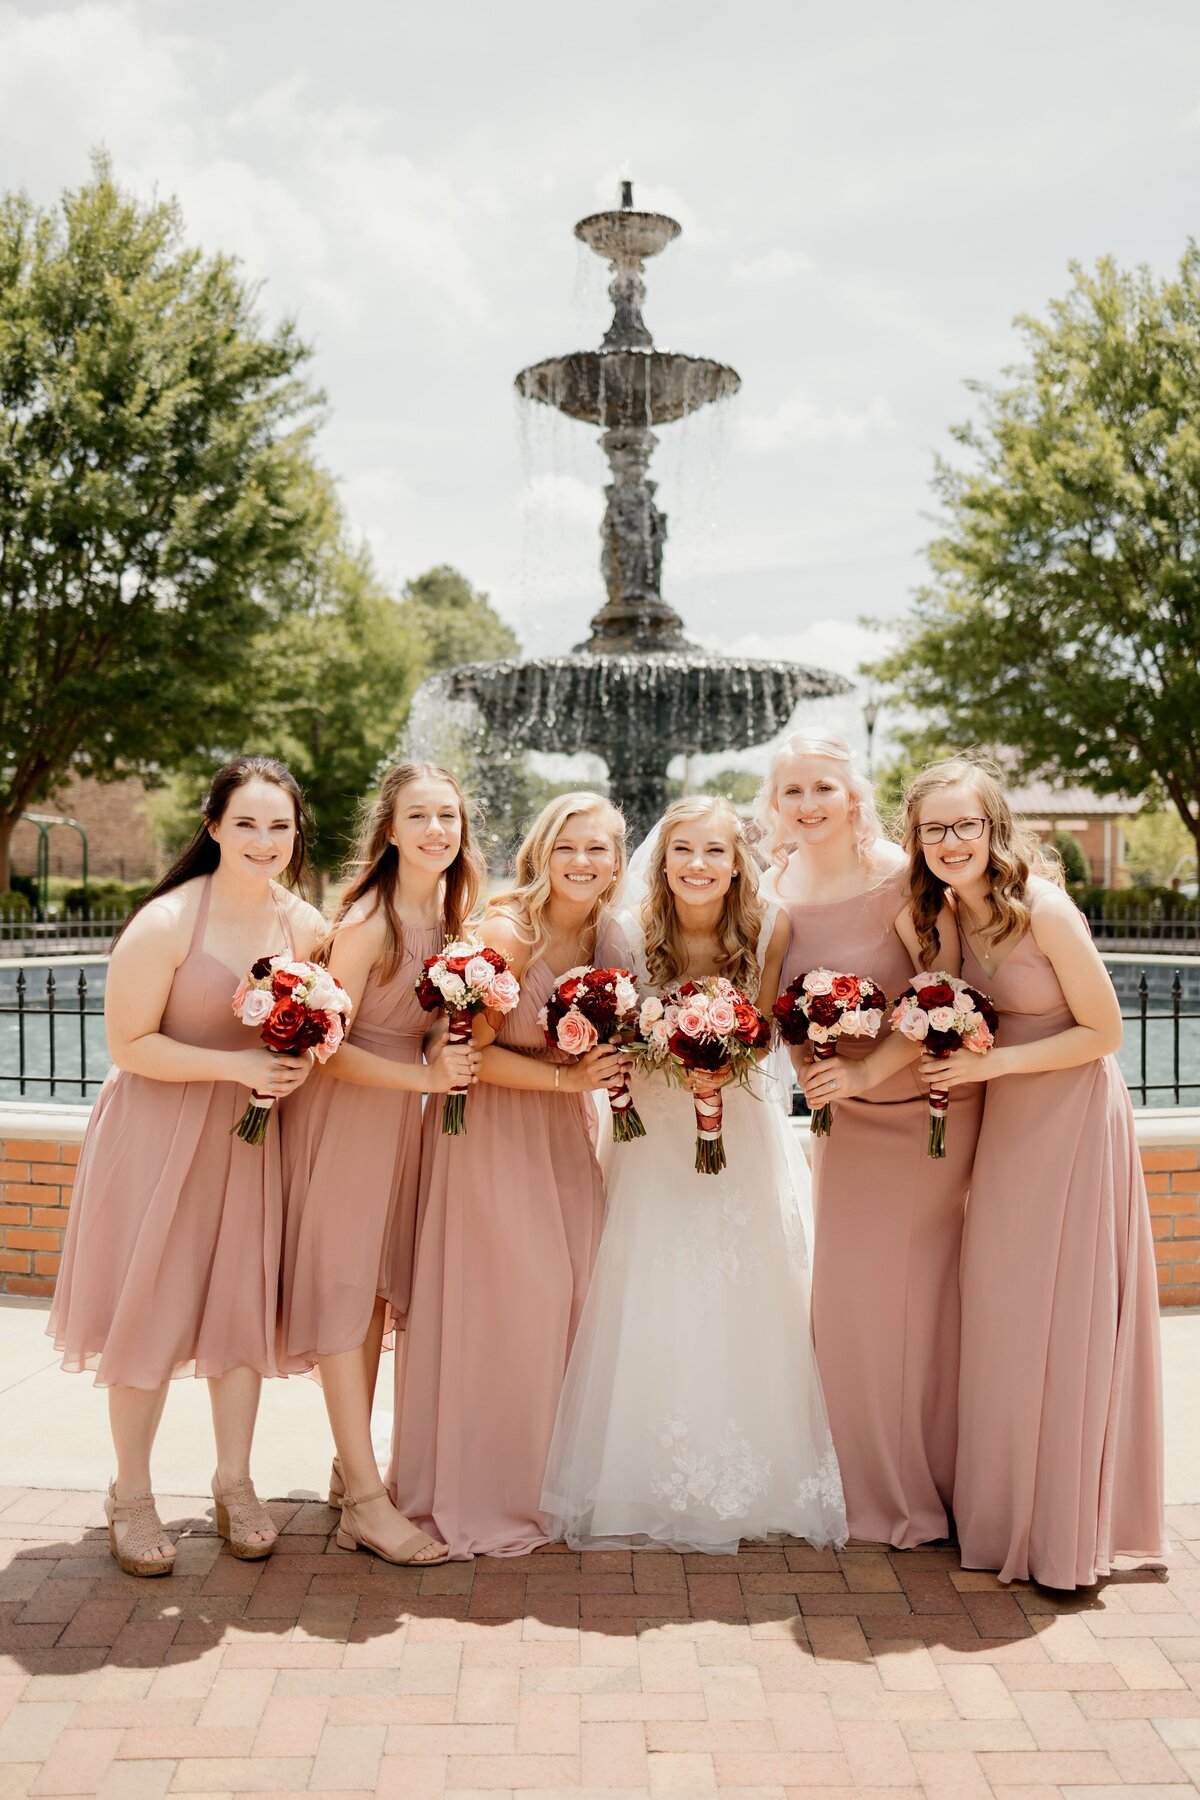 Brides gather together outside at wedding venue in Tennessee